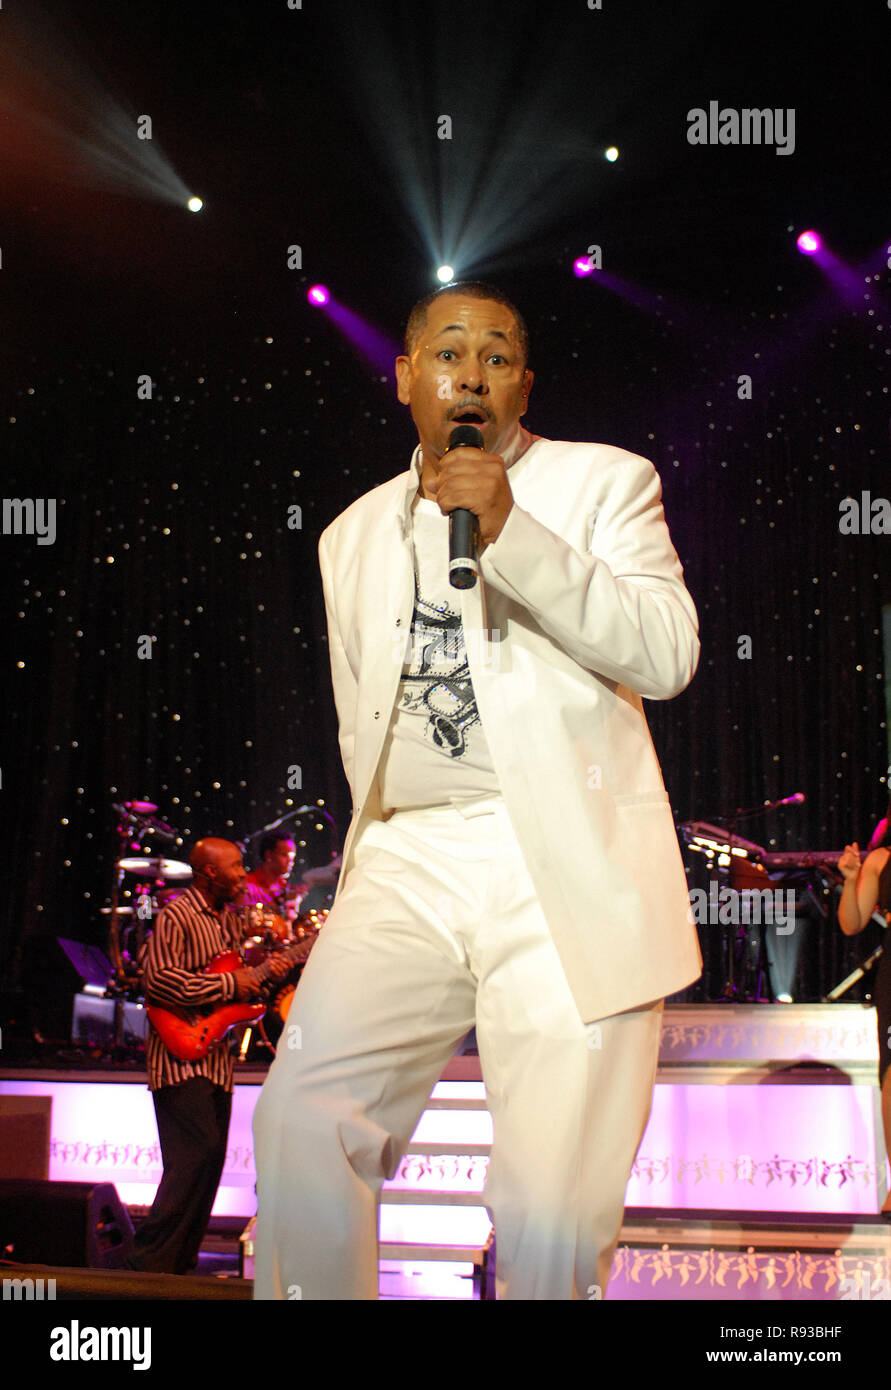 Ralph Johnson with Earth Wind and Fire performs in concert at the Mizner Park Amphitheatre in Boca Raton, Florida on April 27, 2007. Stock Photo